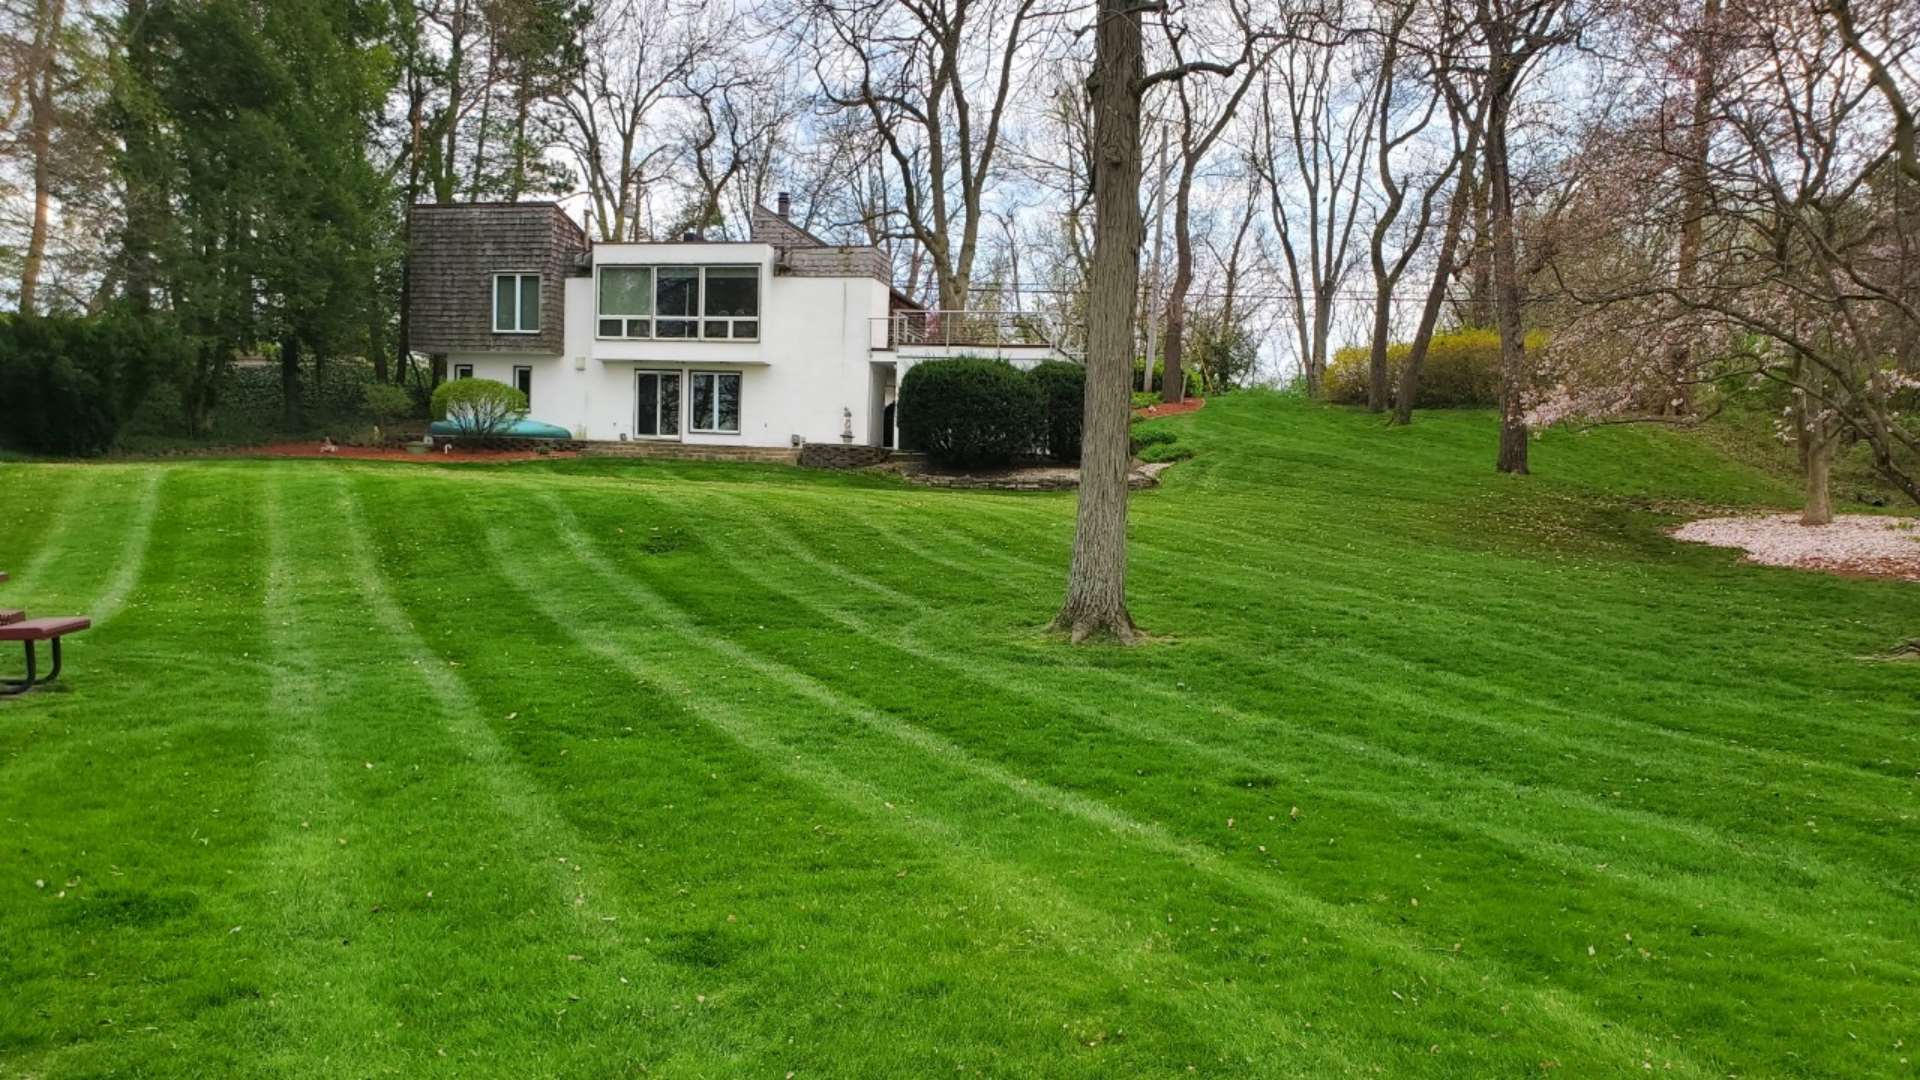 Home front with mowed lawn and patterns added in East Alton, IL.